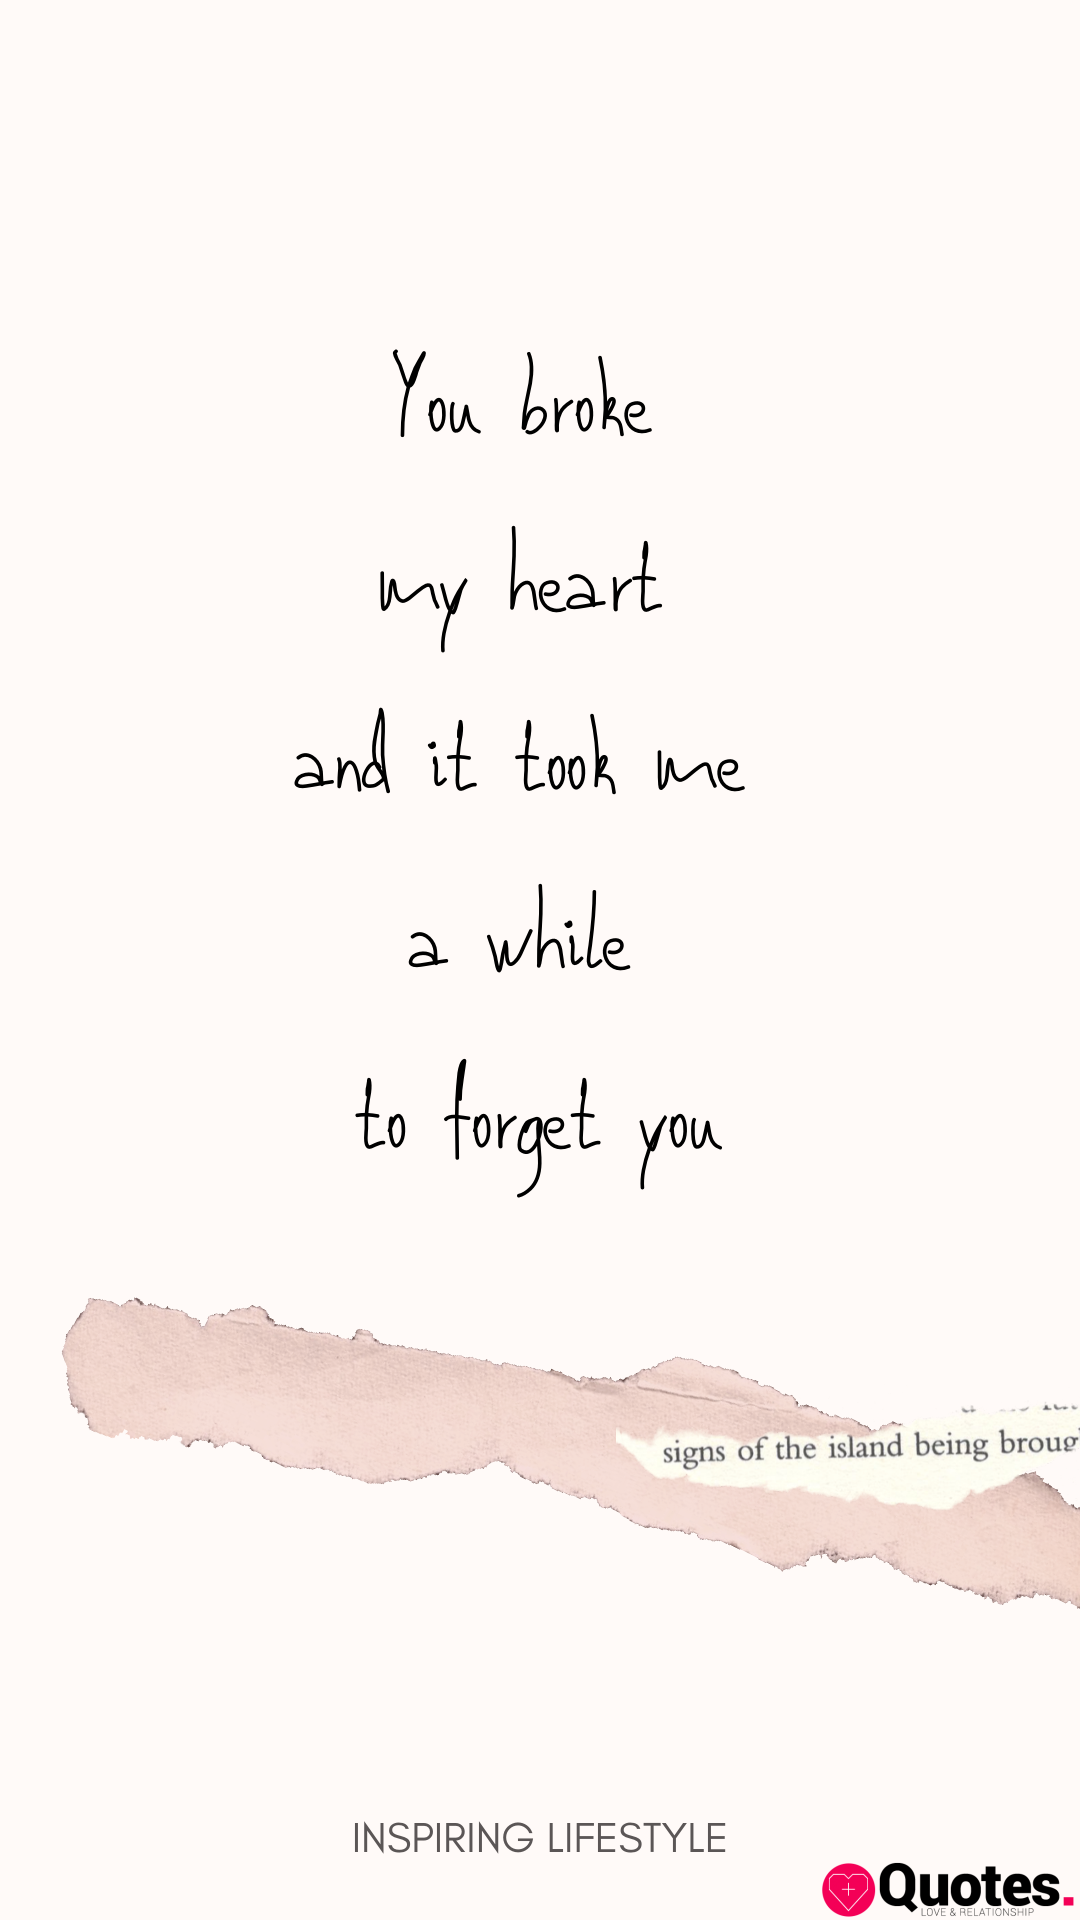 30 you broke my heart quotes : Heart Healing ♡ - Love Quotes Daily -  Leading Love  Relationship Quotes, Sayings  Collections